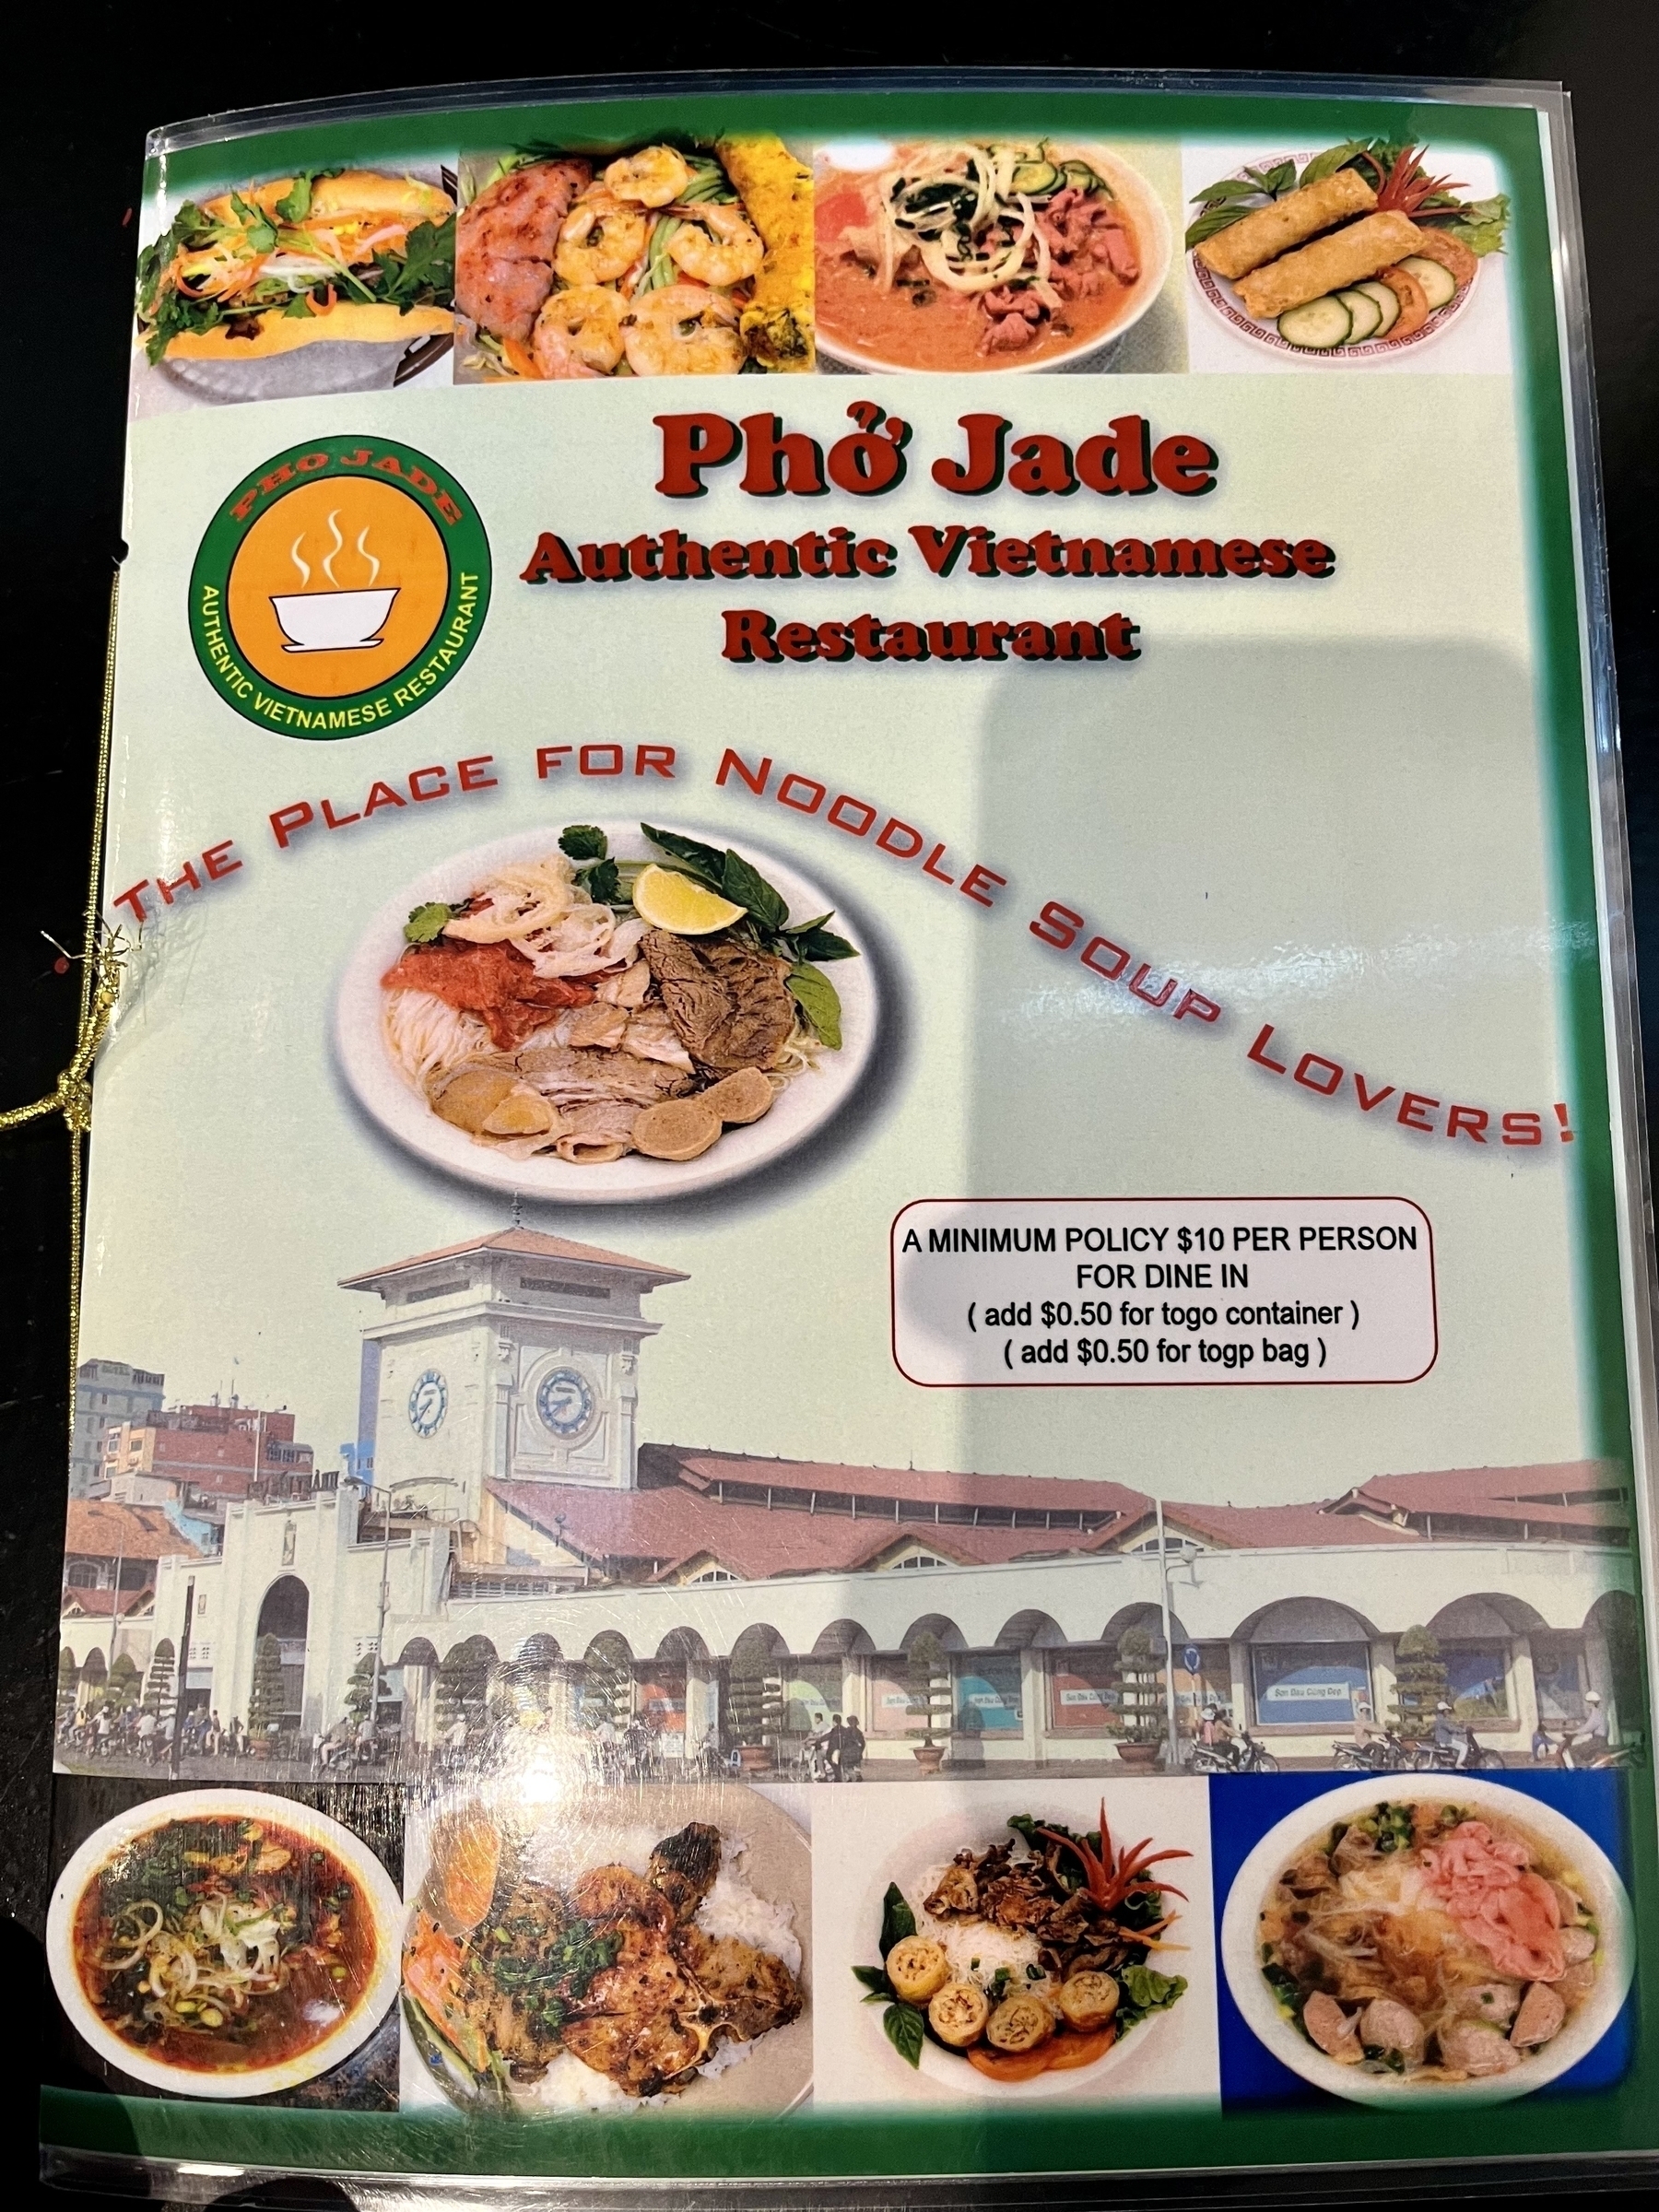 Phở Jade Menu cover - Authentic Vietnamese Restaurant - The Place for Noodle Soup Lovers